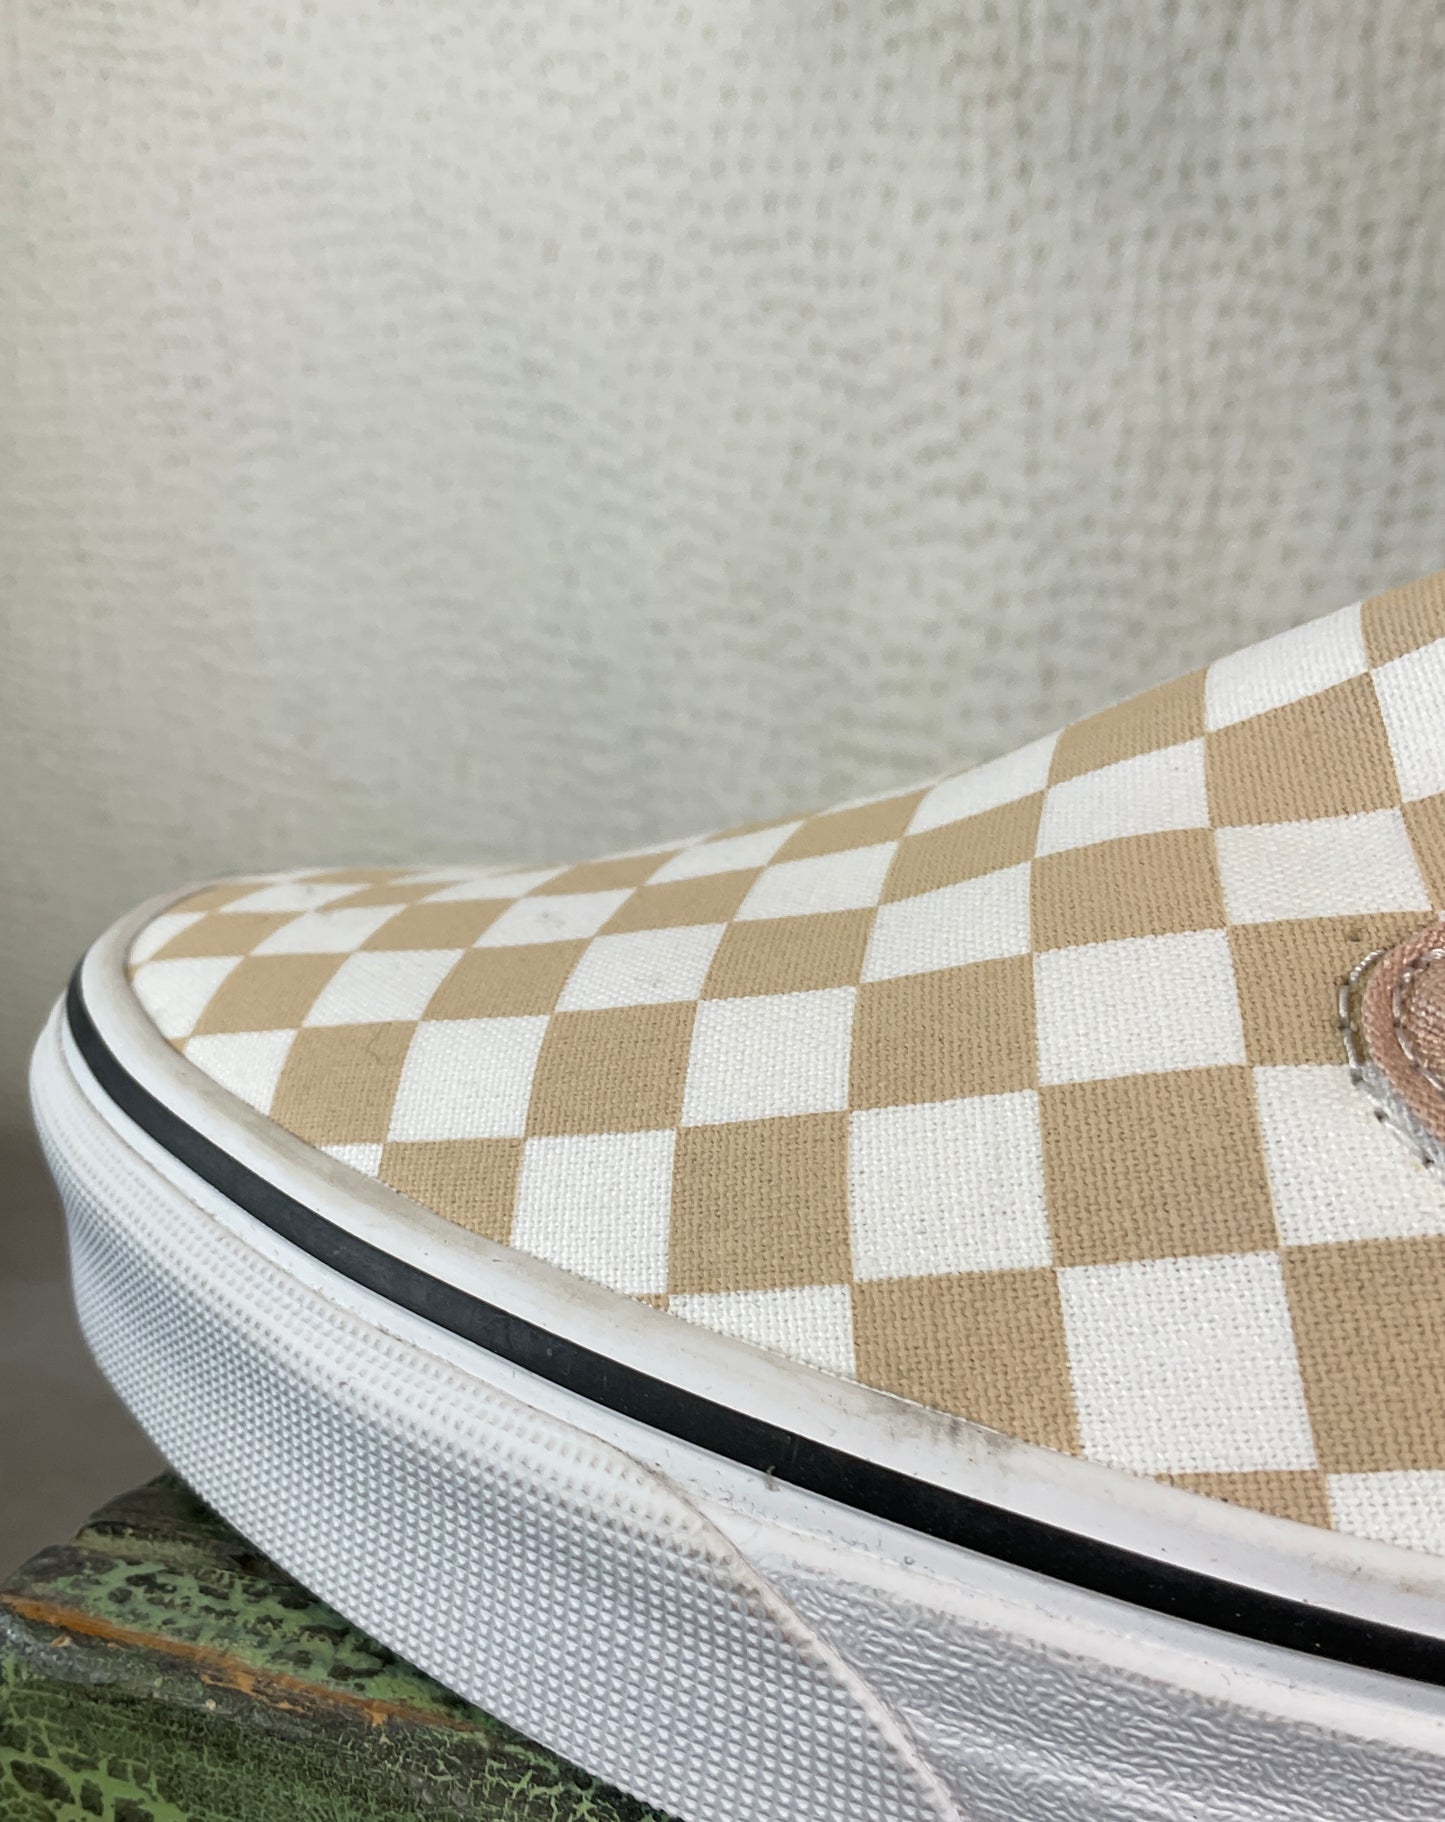 Vans Classic Slip-On 'Tiger's Eye' Shoes, Size M 8.5/ W 10